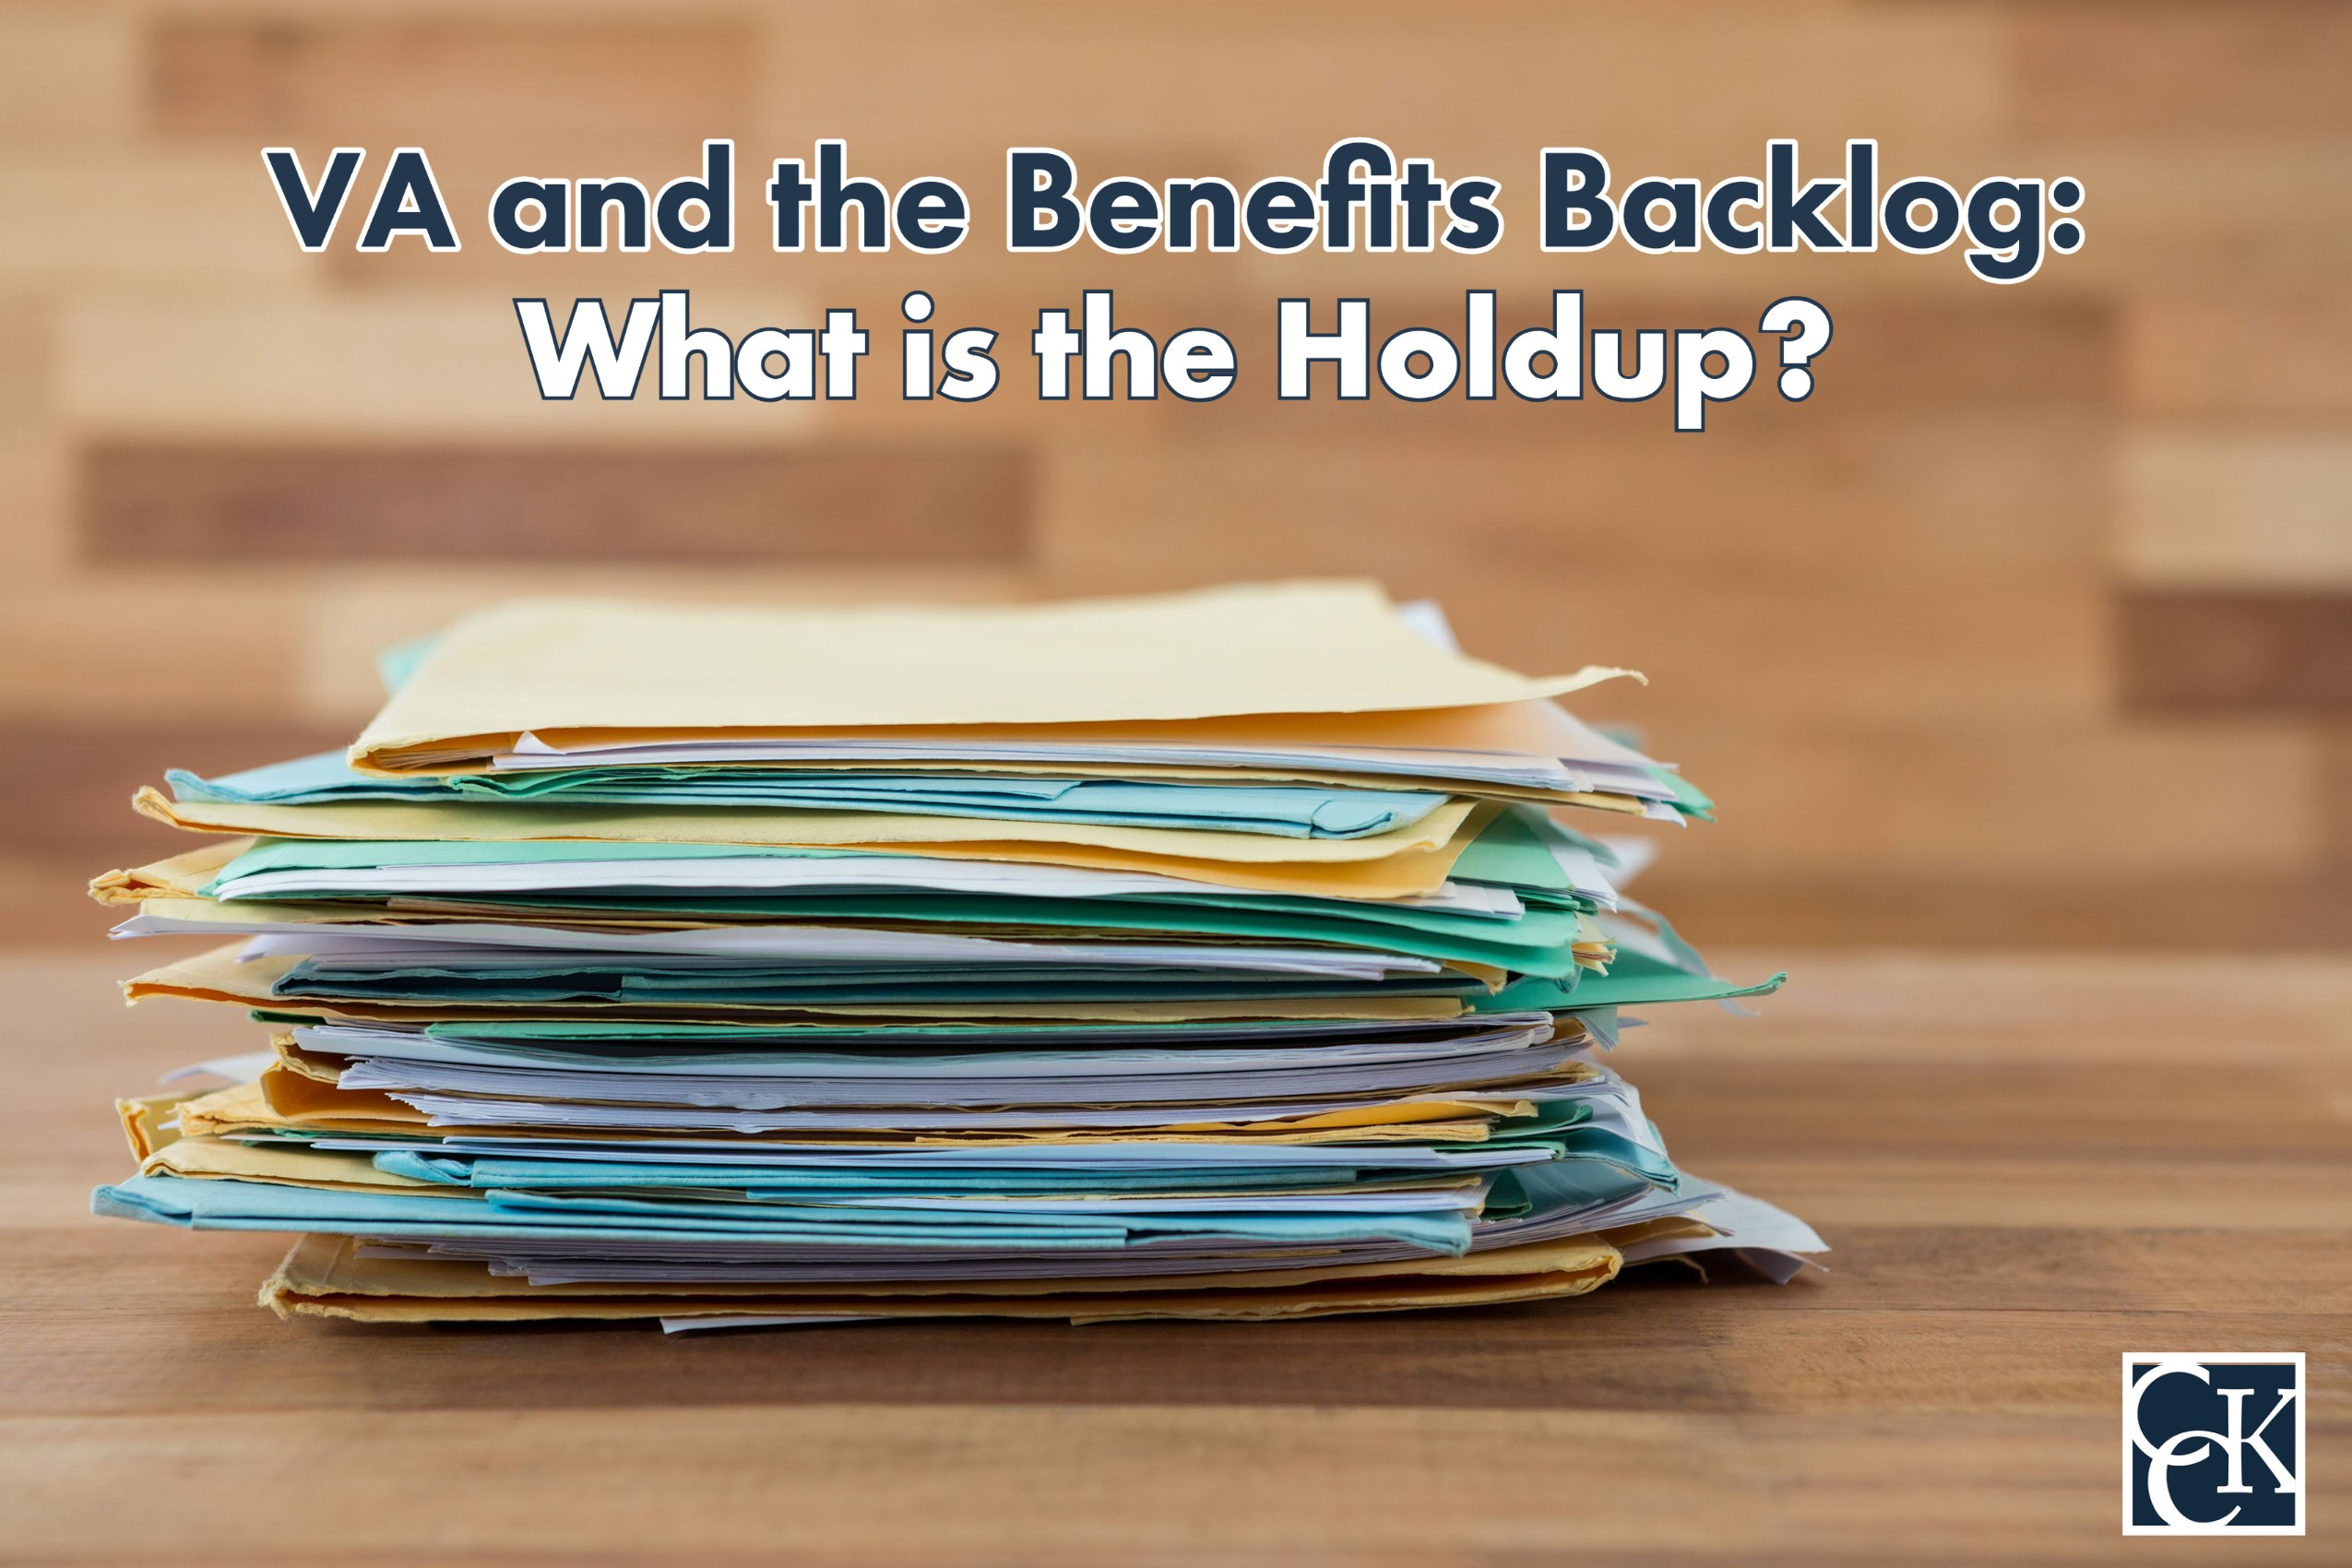 VA and the 2021 Benefits Backlog What is the Holdup? CCK Law